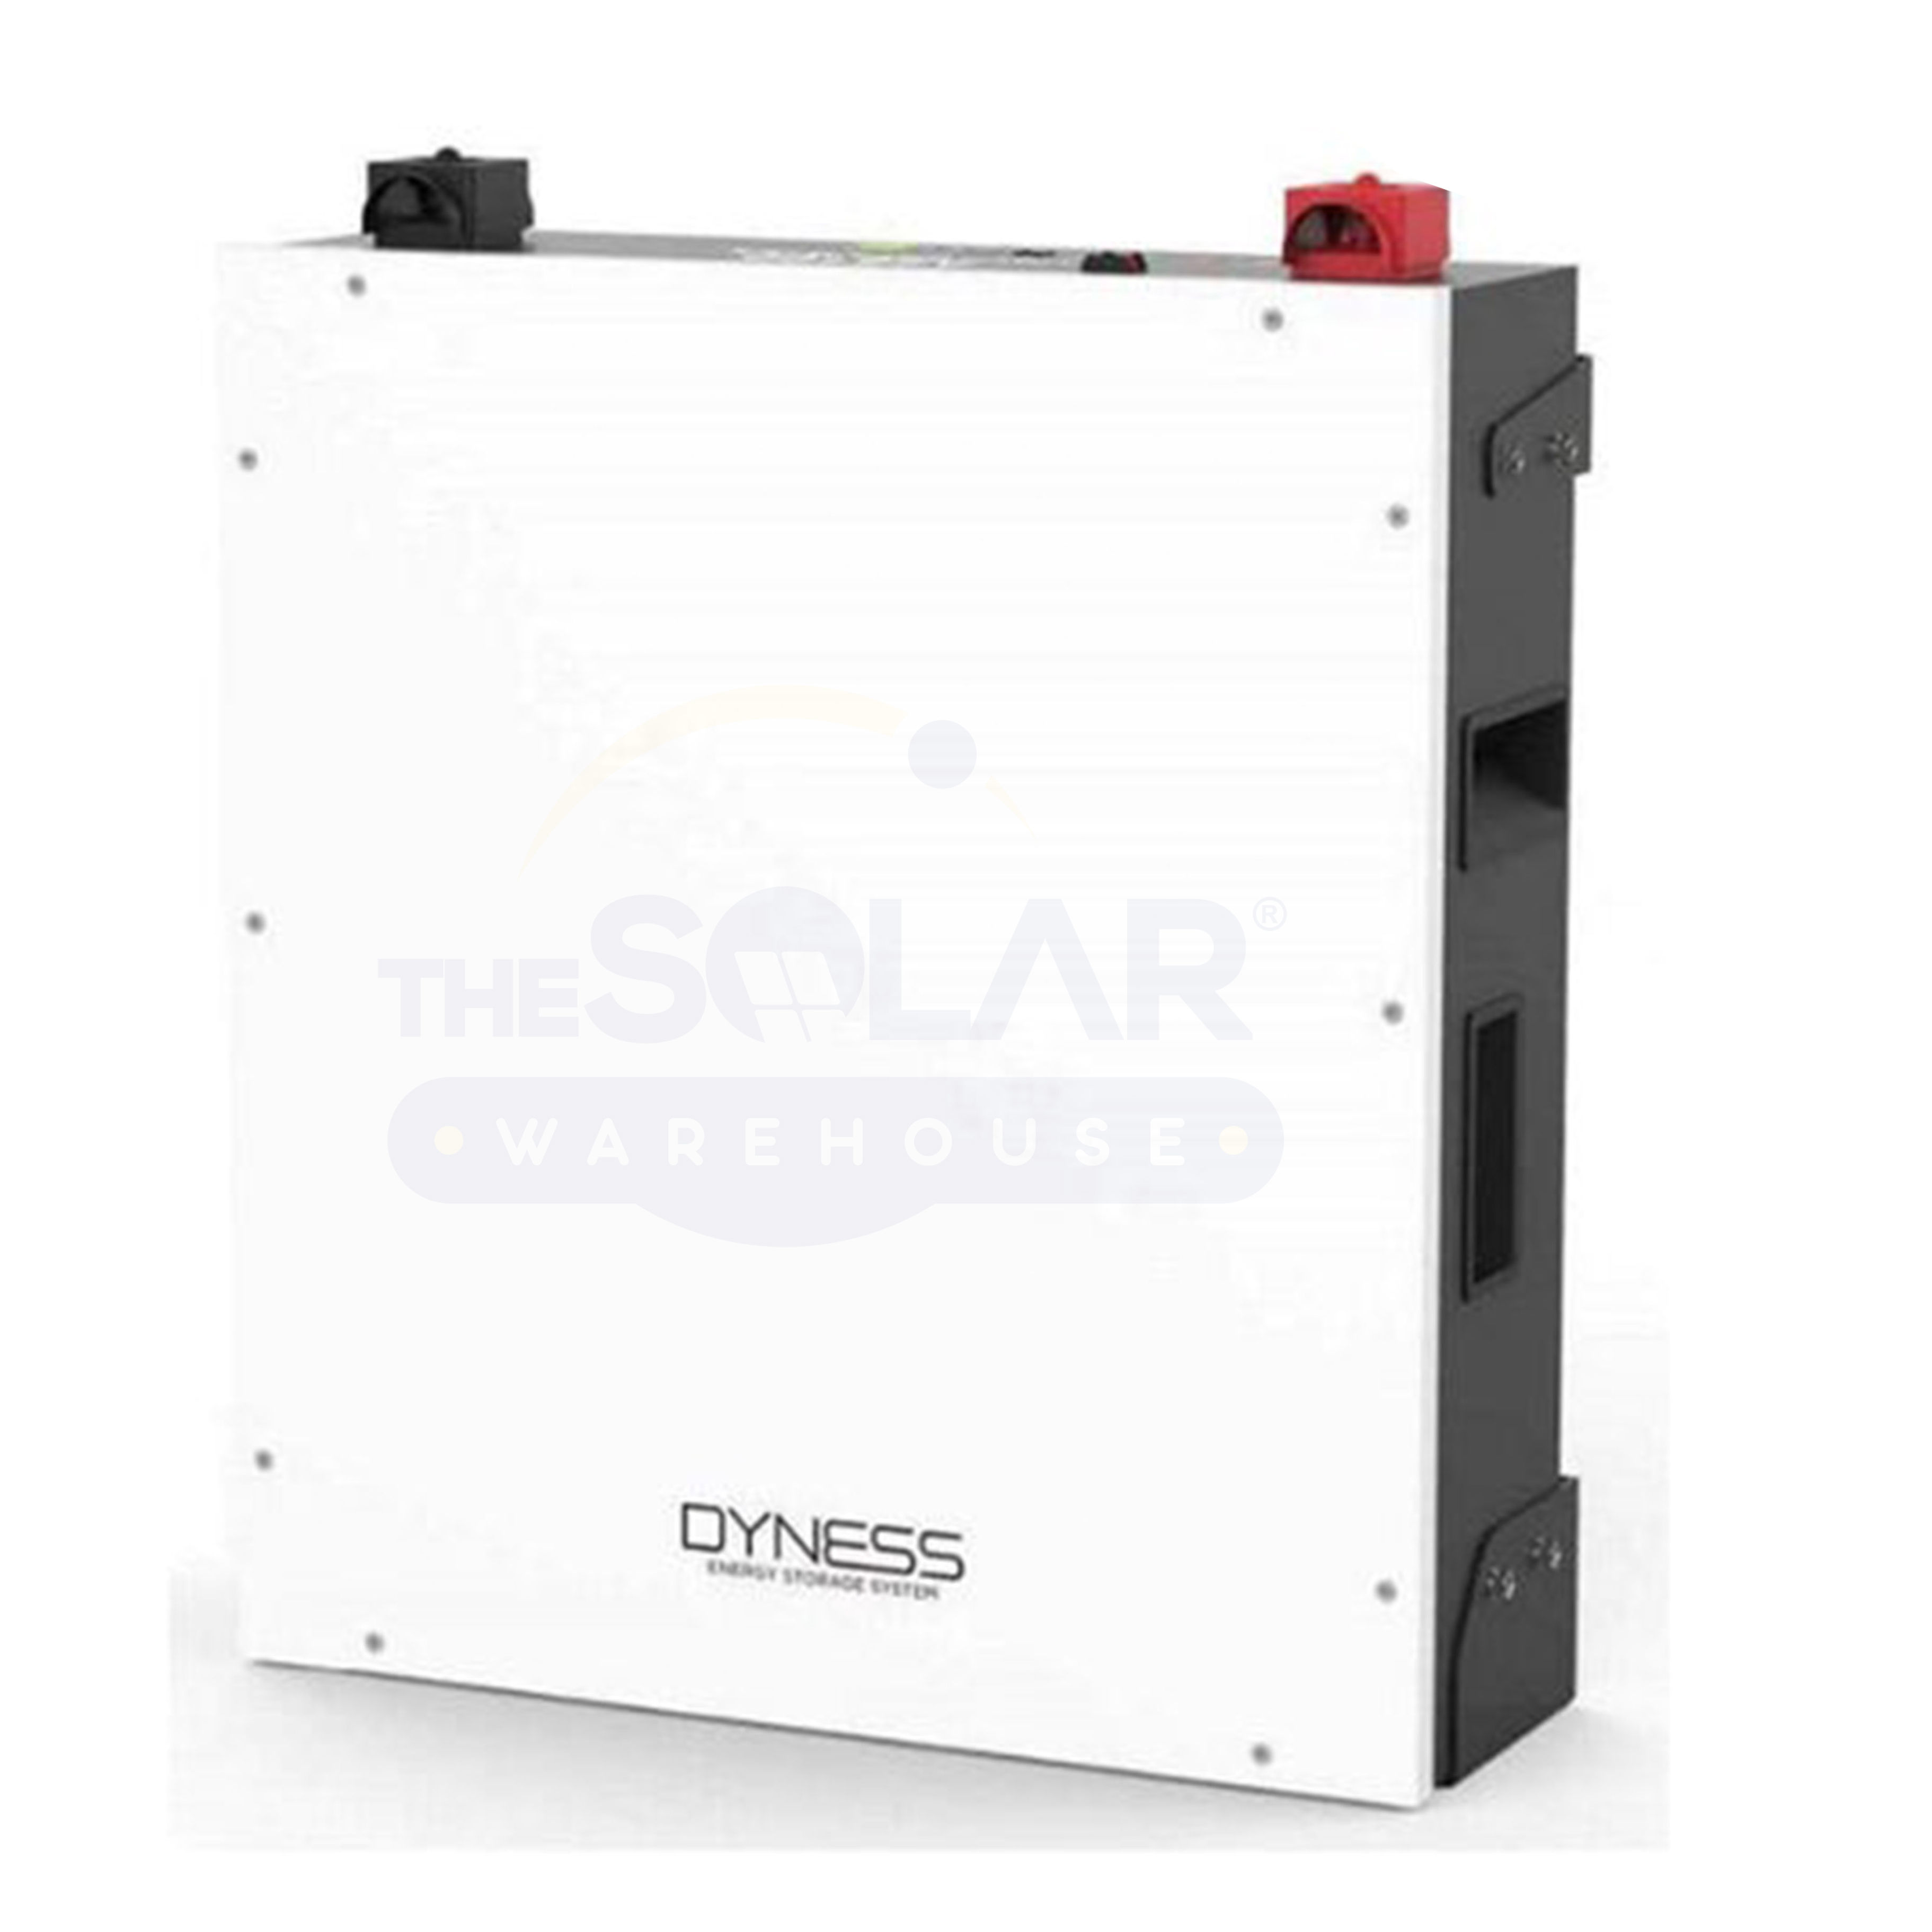 Dyness A48100 48vDC 4.8Kwh Lithium Battery Module